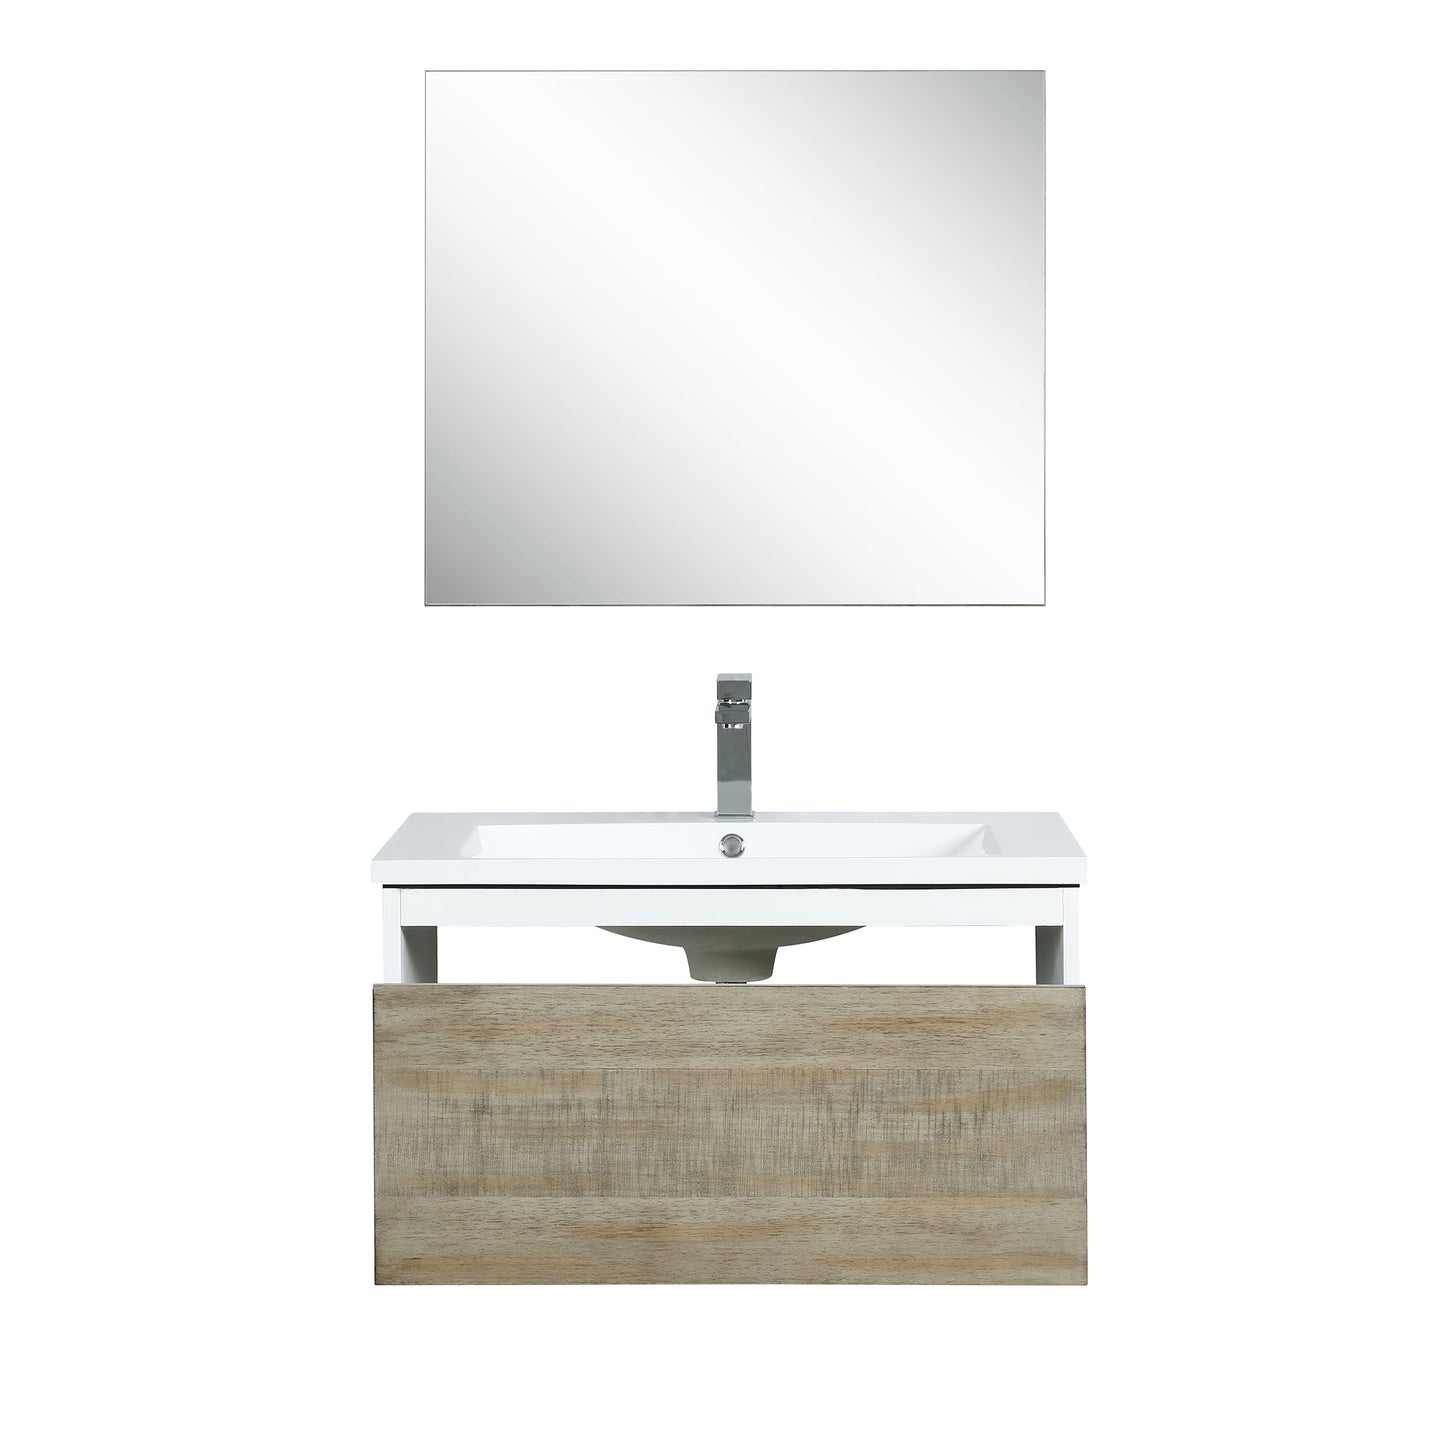 Lexora Scopi 30" Rustic Acacia Bathroom Vanity, Acrylic Composite Top with Integrated Sink, Faucet Set, and 28" Frameless Mirror - Luxe Bathroom Vanities